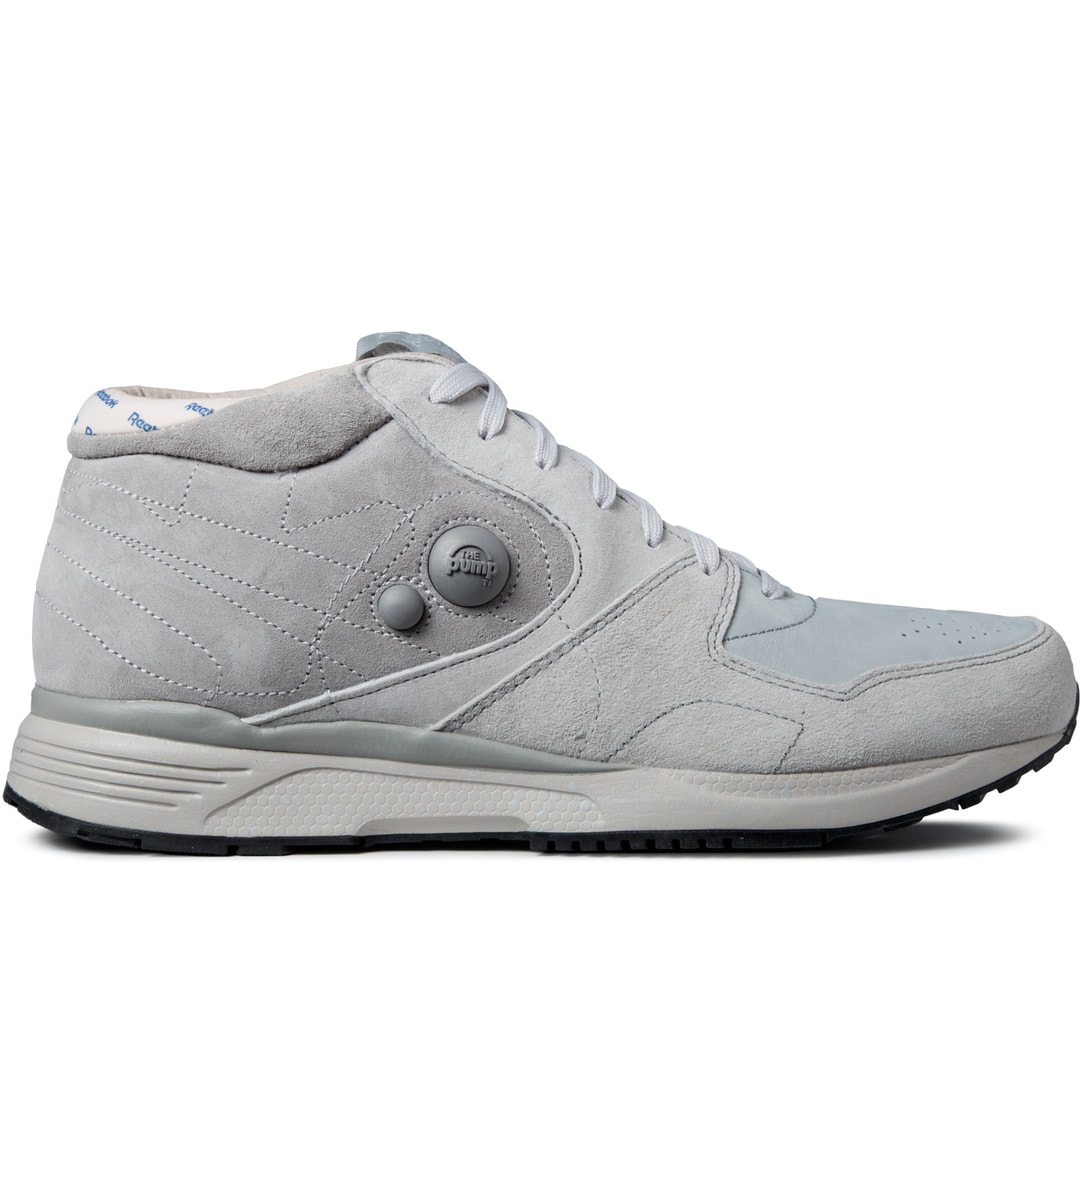 Reebok - Garbstore x Carbon/Steel/Grey M43012 GS Pump Running Dual Mid Shoes | HBX - Globally Curated Fashion and Lifestyle by Hypebeast